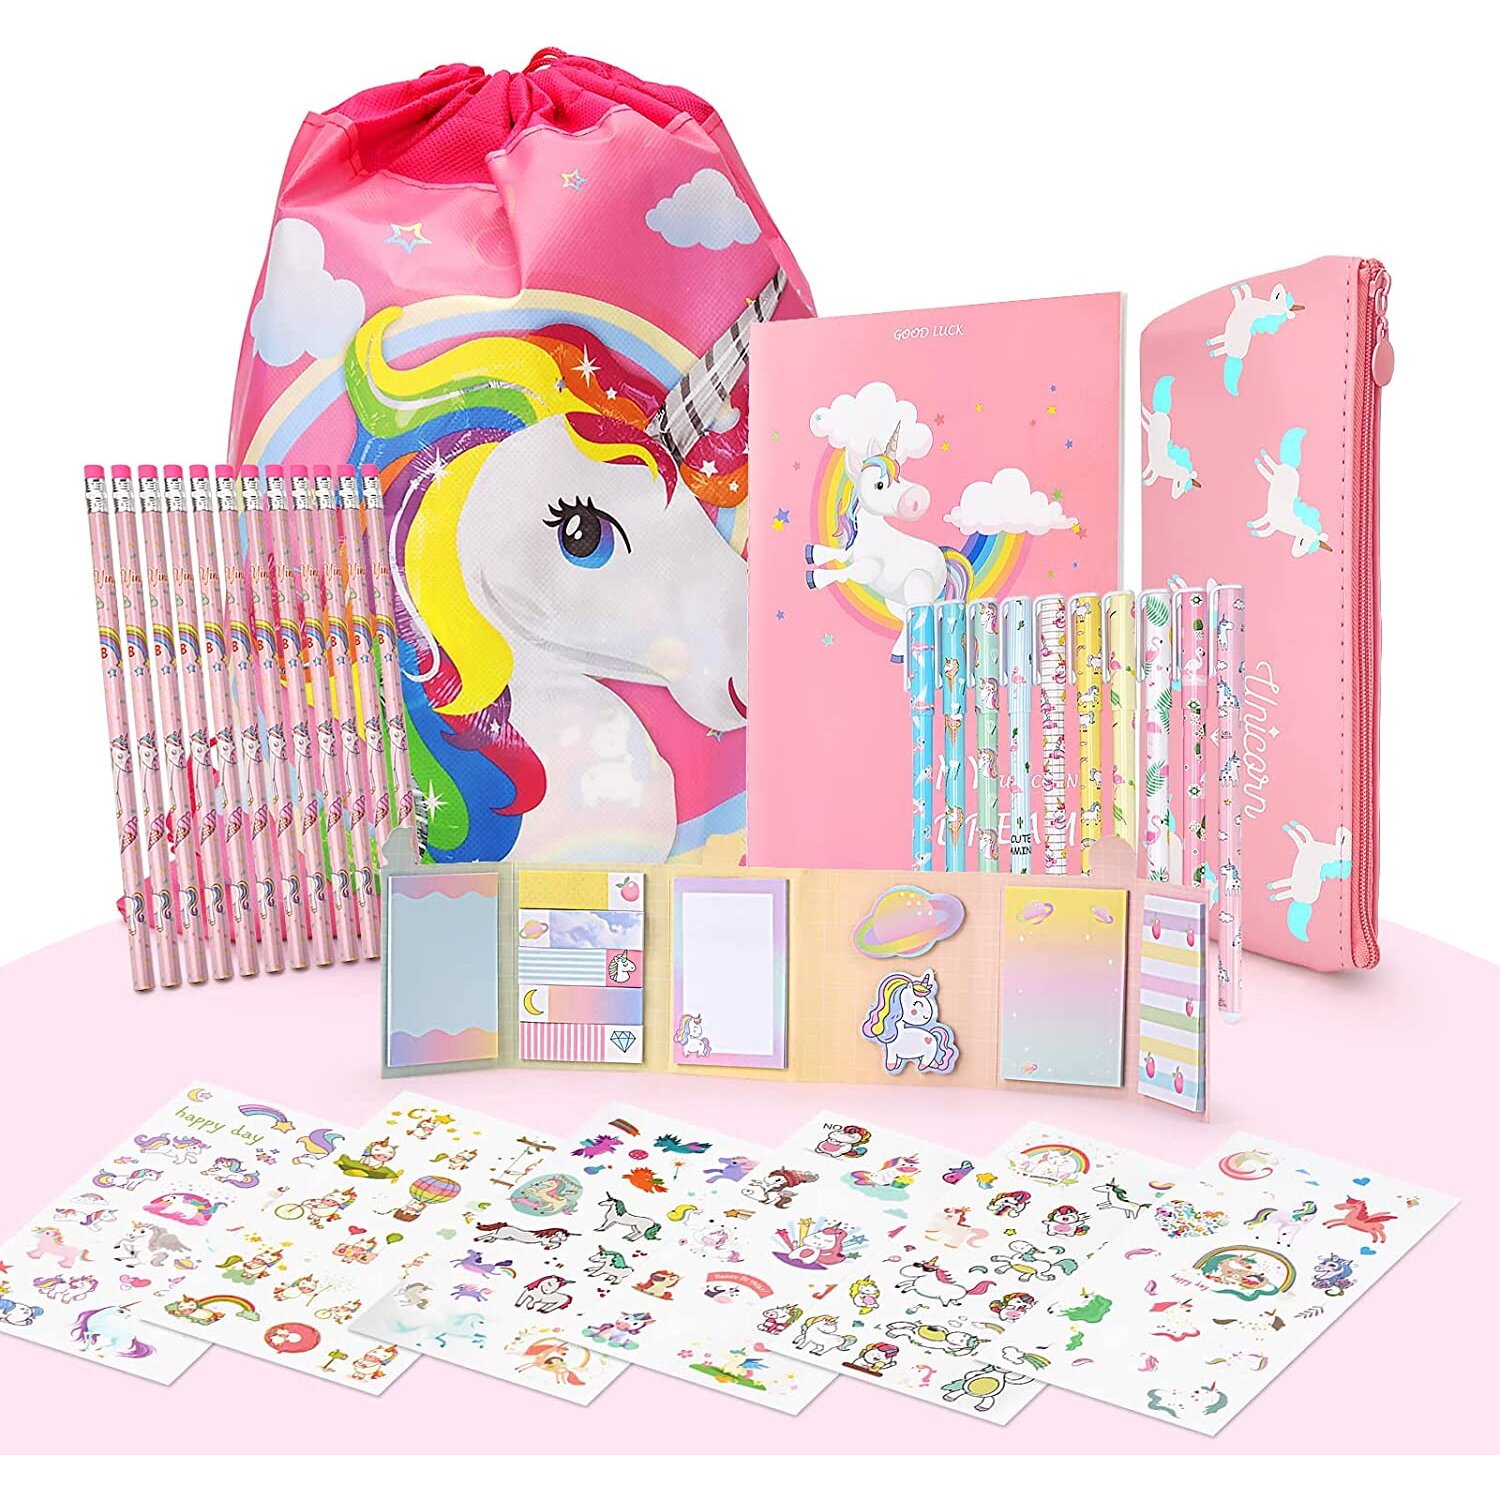 Maomaoyu Cute Unicorn Gift for Girls, Pencil Case with 12 Colorful Unicorn Pencils and Unicorn Aesthetic Stickers, Stationery Sets for Teenage